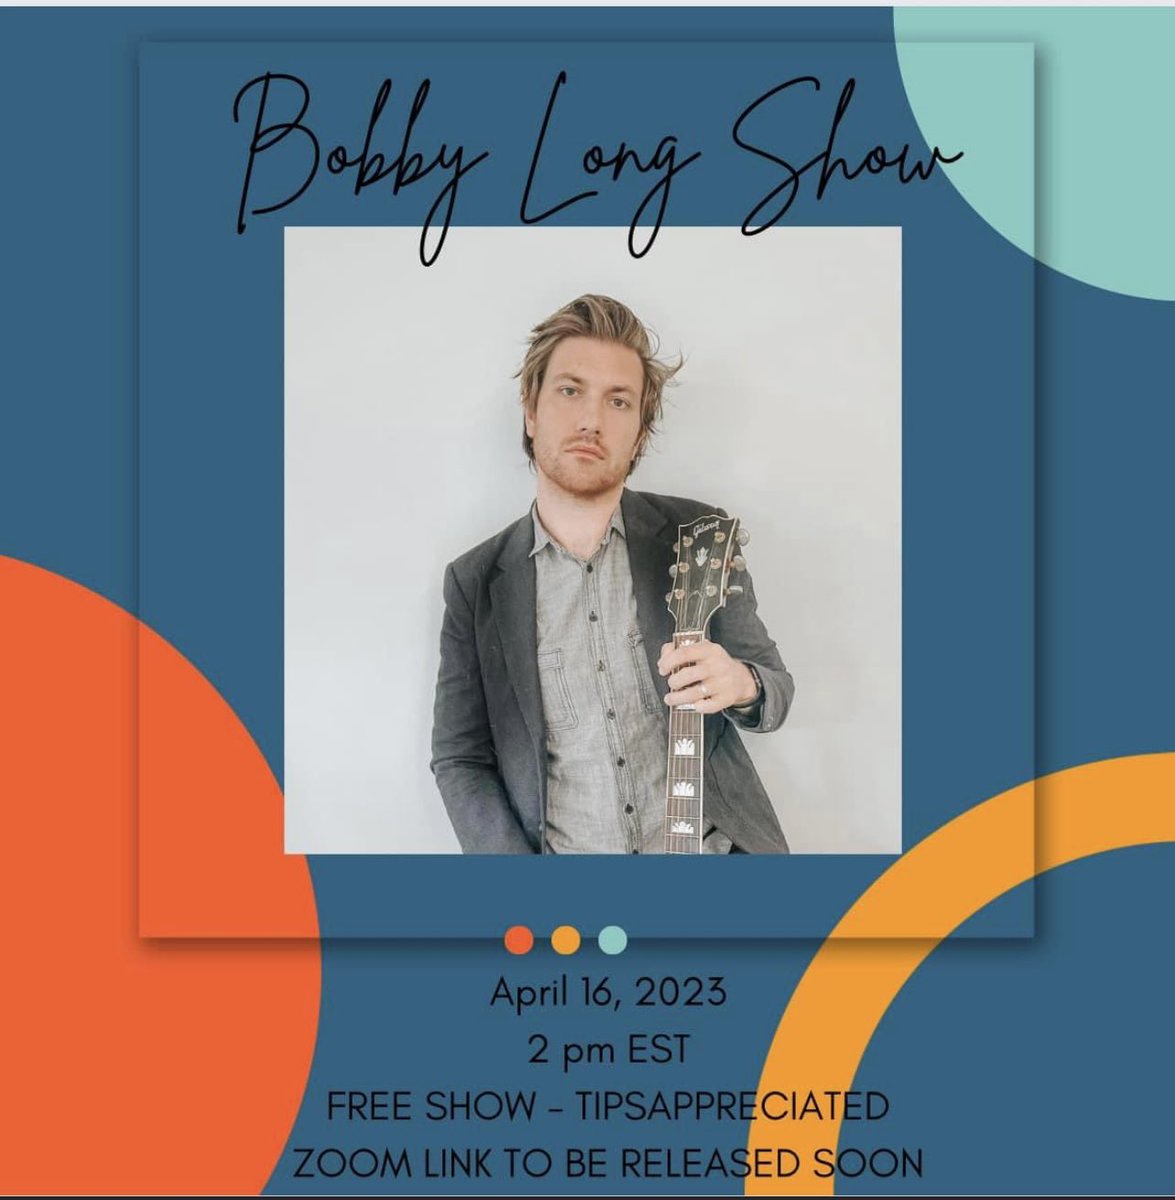 It’s almost time!! @BobbyLongNews Zoom Spring Concert on April 16th! With only 2 days left, be sure to register before the show so you can join in on the fun. Here's the Zoom link you'll need: tinyurl.com/3bpwtxbm See you there!